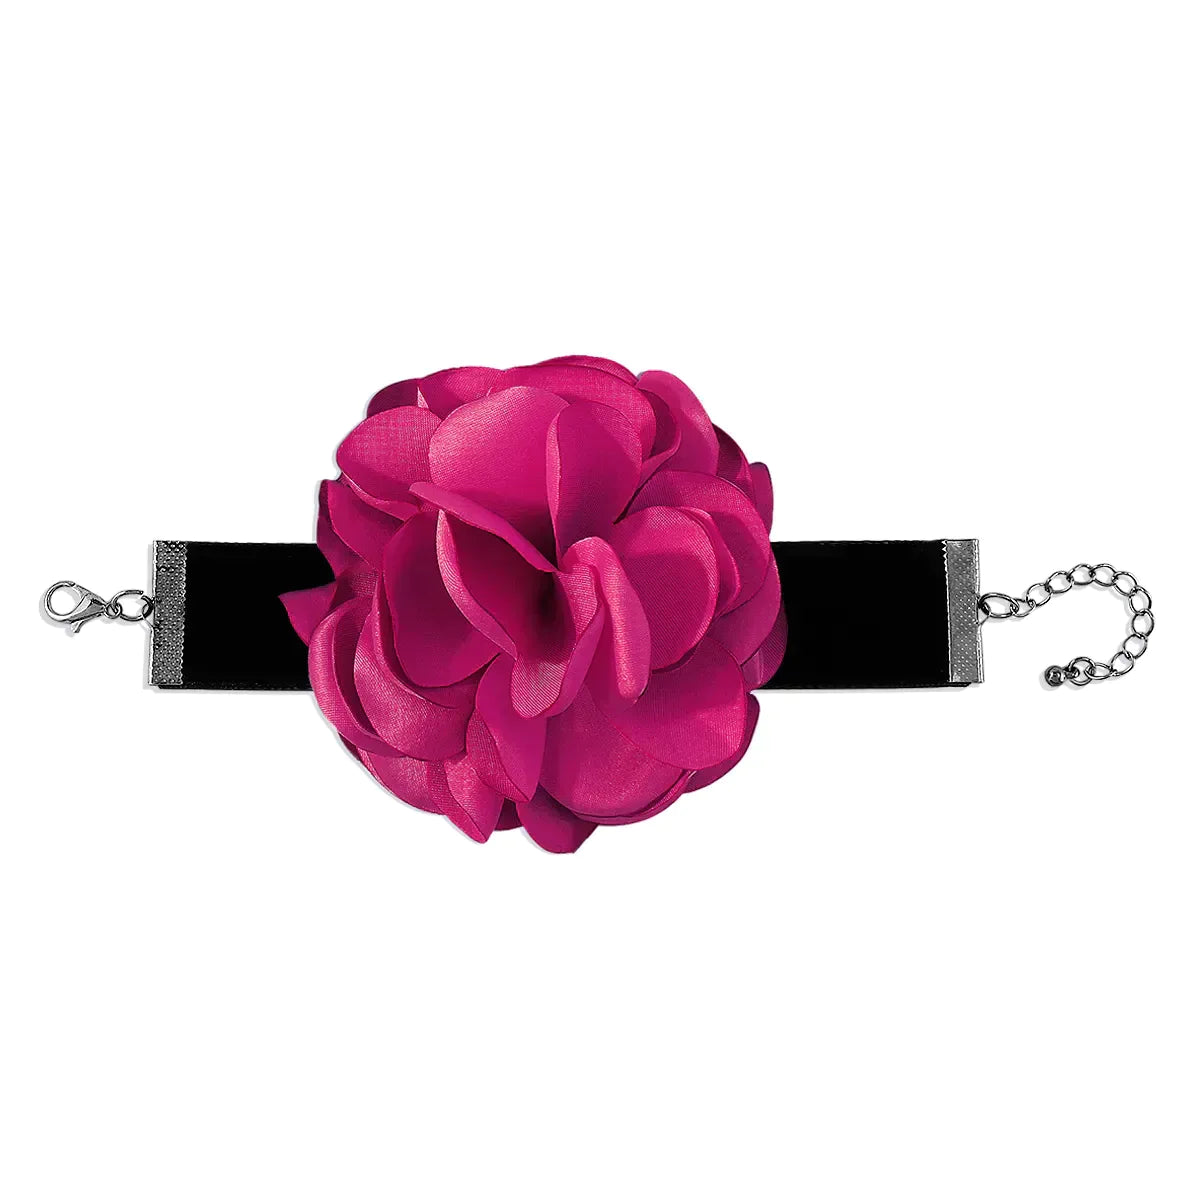 THE HARRY INSPIRED CORSAGE FLOWER BRACELET - ROSE RED - EXCLUSIVE Jewellery from HEYIAMINHATELOVE - Just €10! SHOP NOW AT IAMINHATELOVE BOTH IN STORE FOR CYPRUS AND ONLINE WORLDWIDE @ IAMINHATELOVE.COM